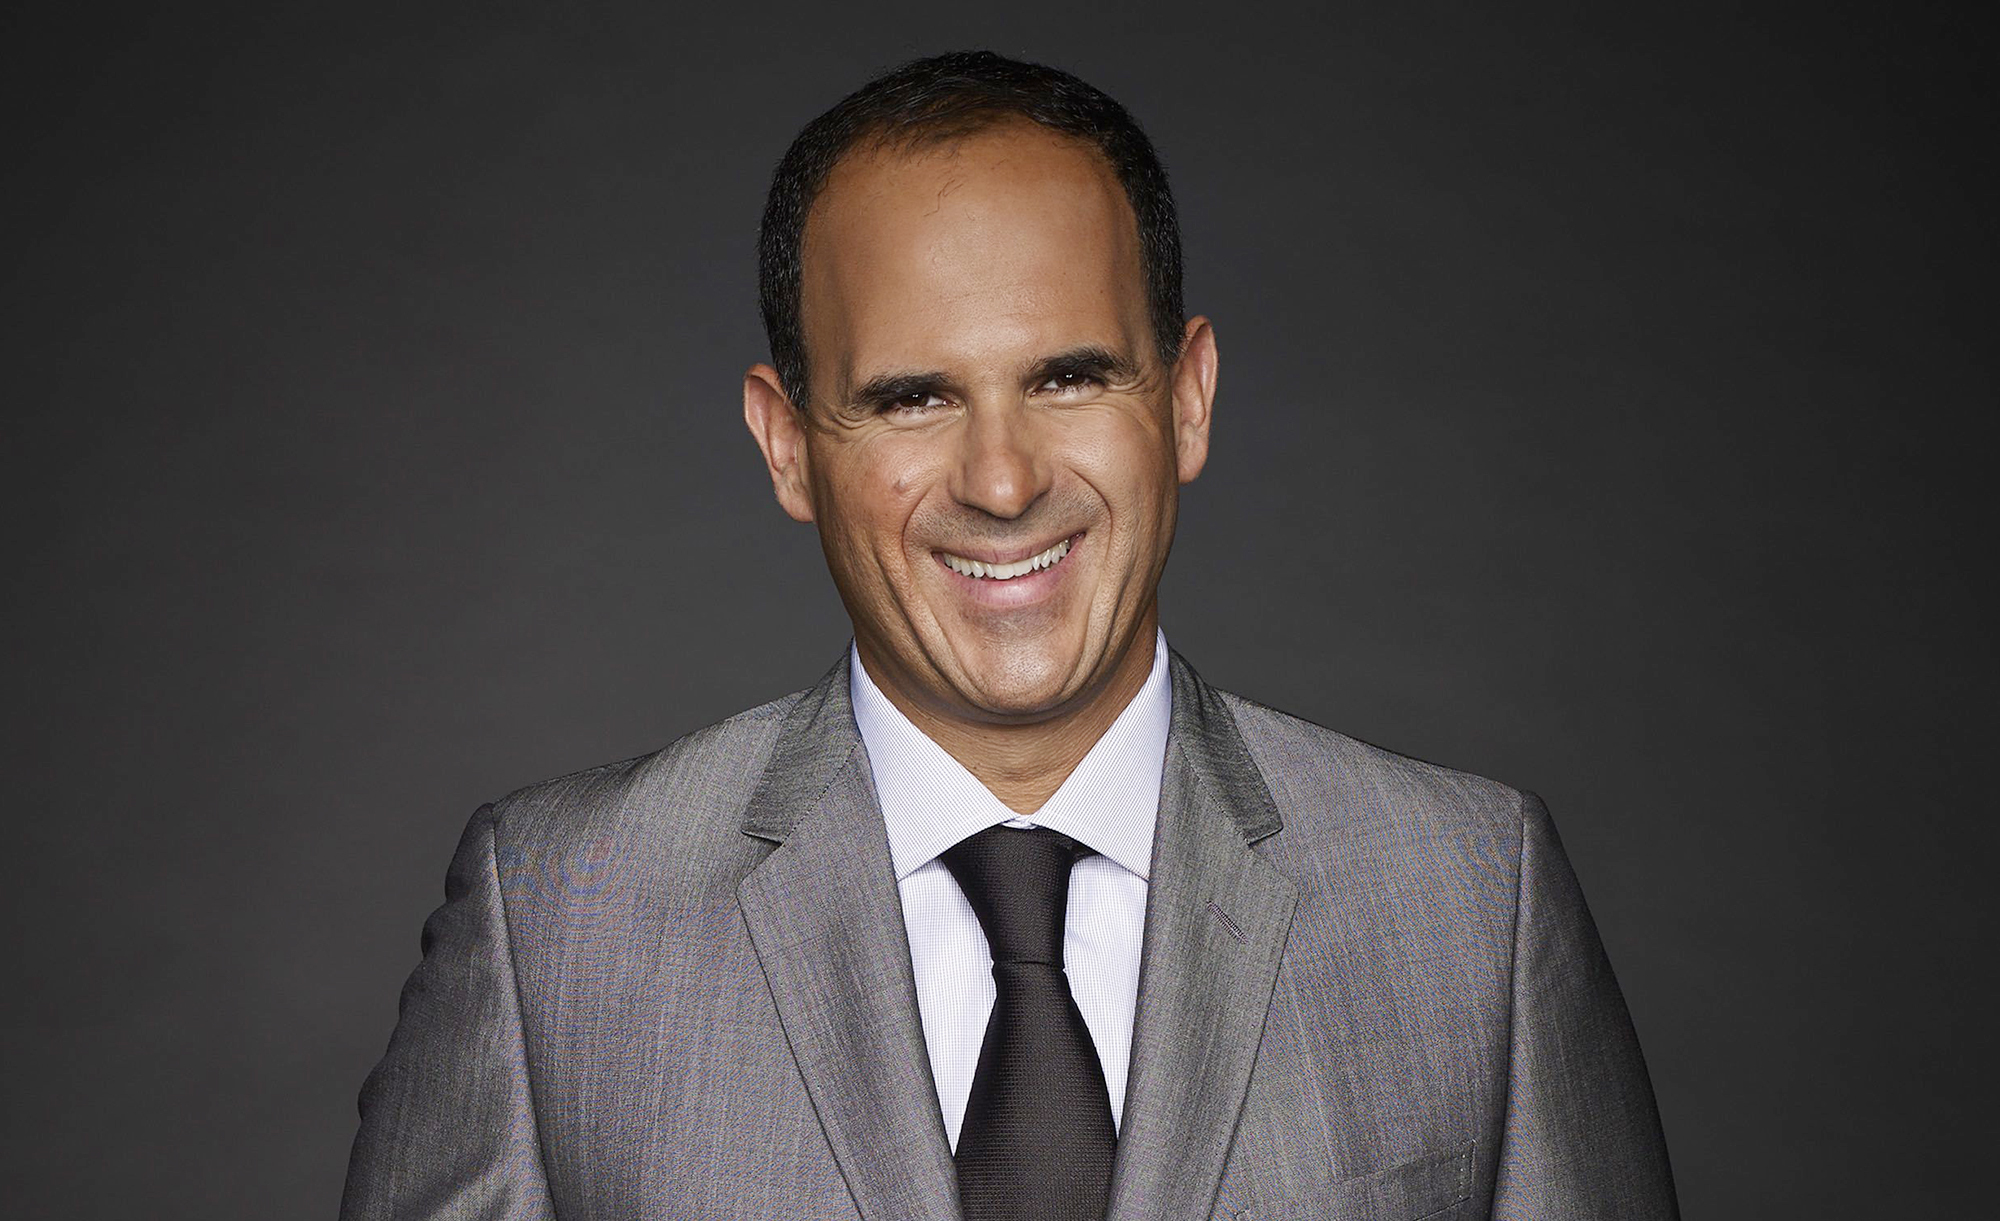 In July 2014, Marcus Lemonis, an investor and reality TV host of “The Profit,”  paid $550,000 for building that is now is the home of Sweet Pete's.